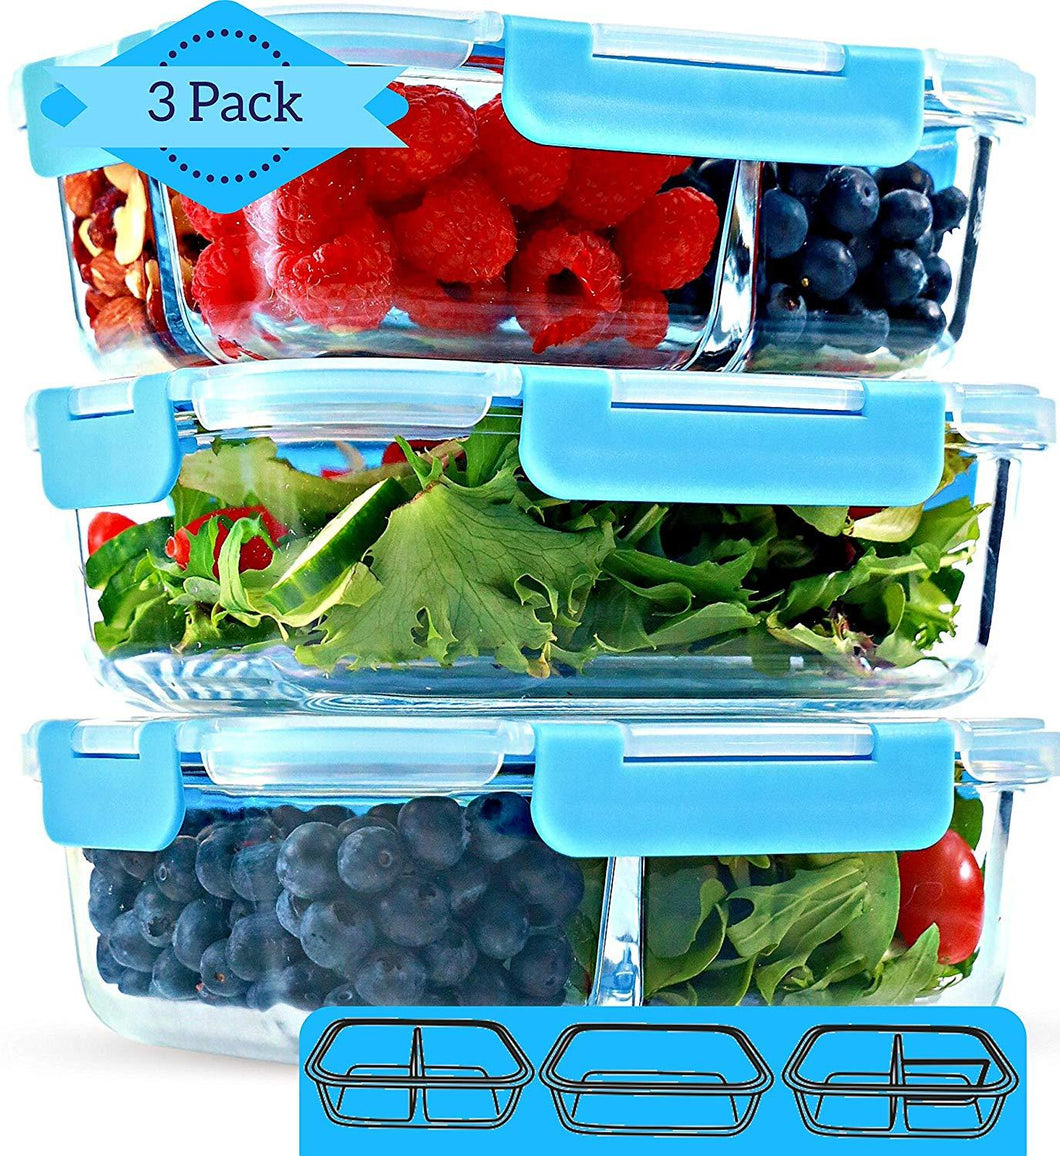 1 & 2 & 3 Compartment Glass Meal Prep Containers (3 Pack, 1000 ML) - Food...